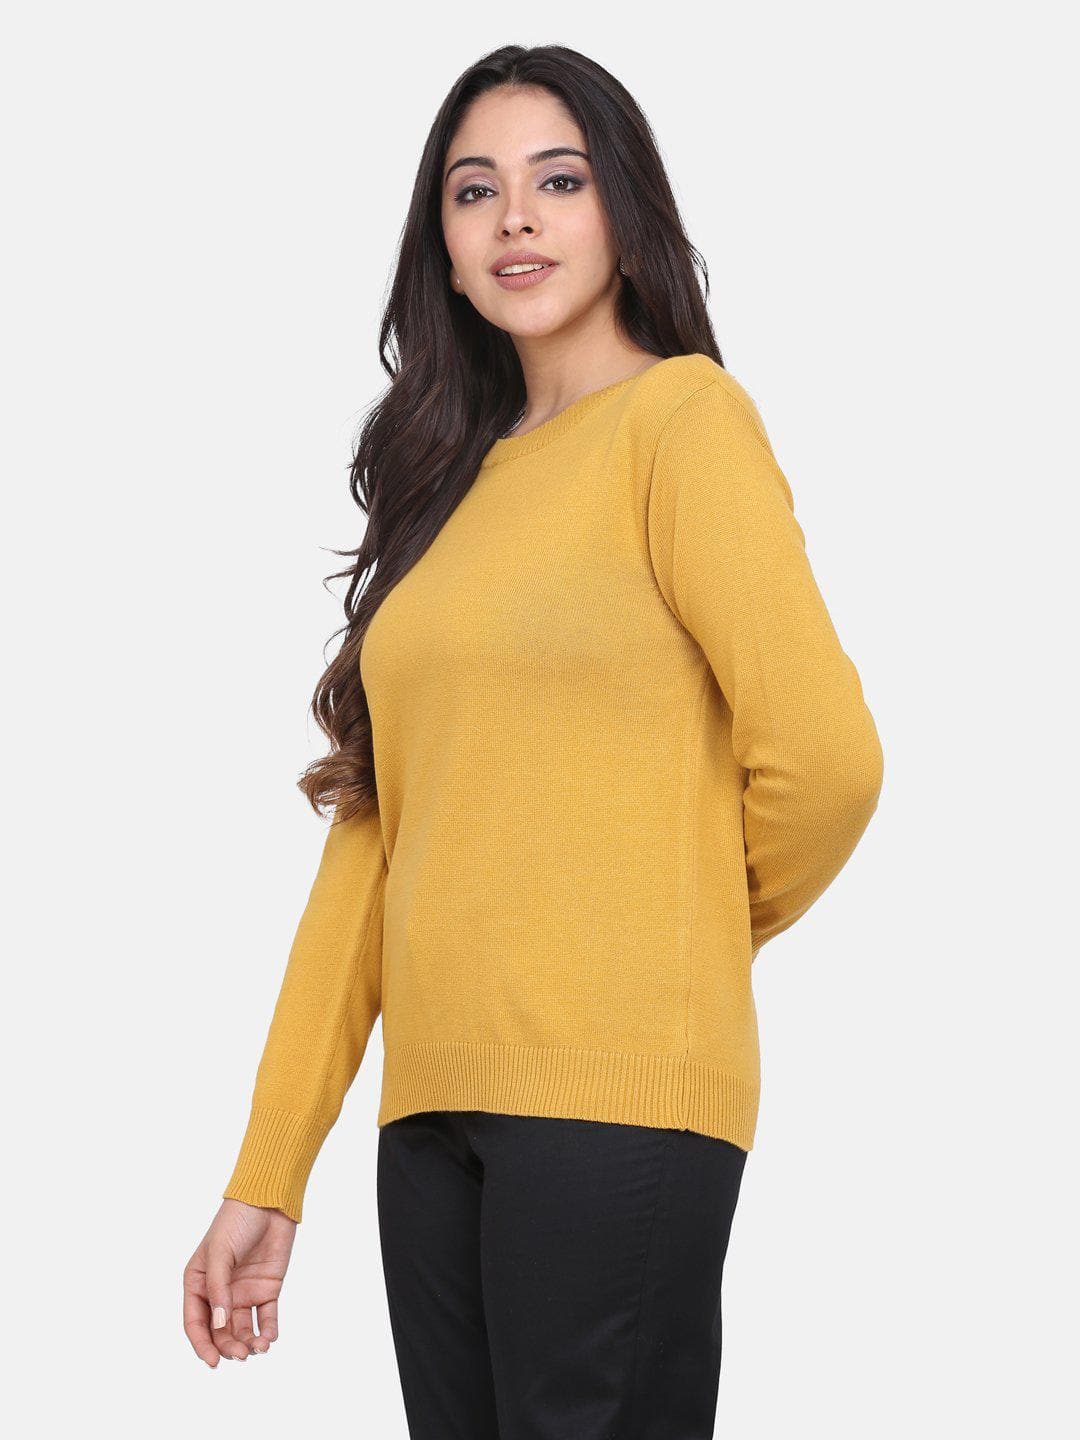 Cotton Pullover For Women - Mustard Yellow